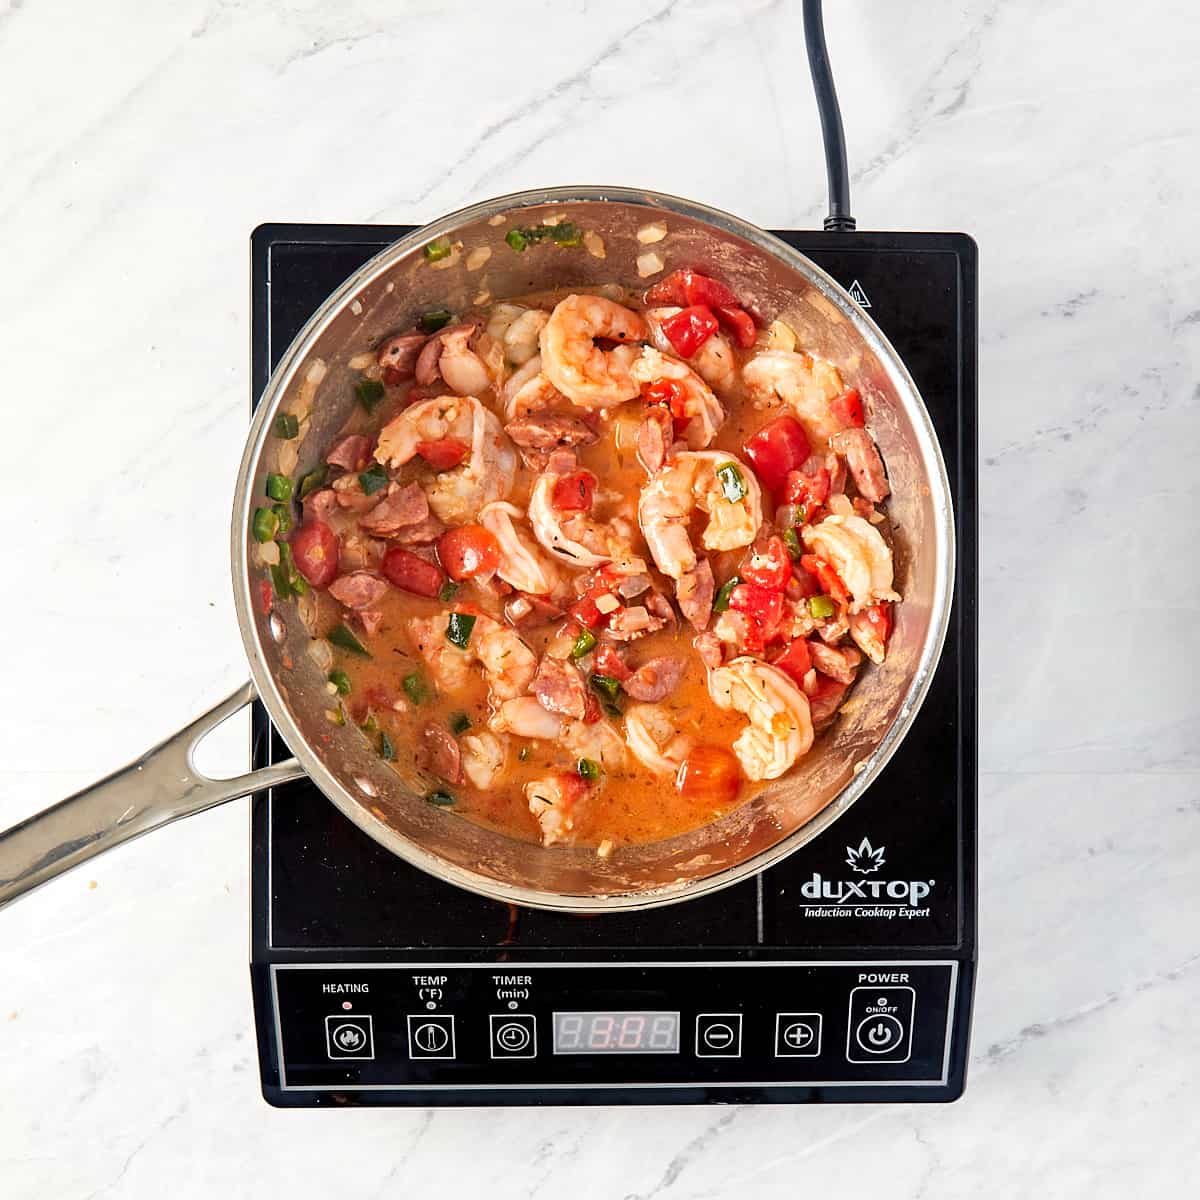 shrimp and sauce in a pan being cooked